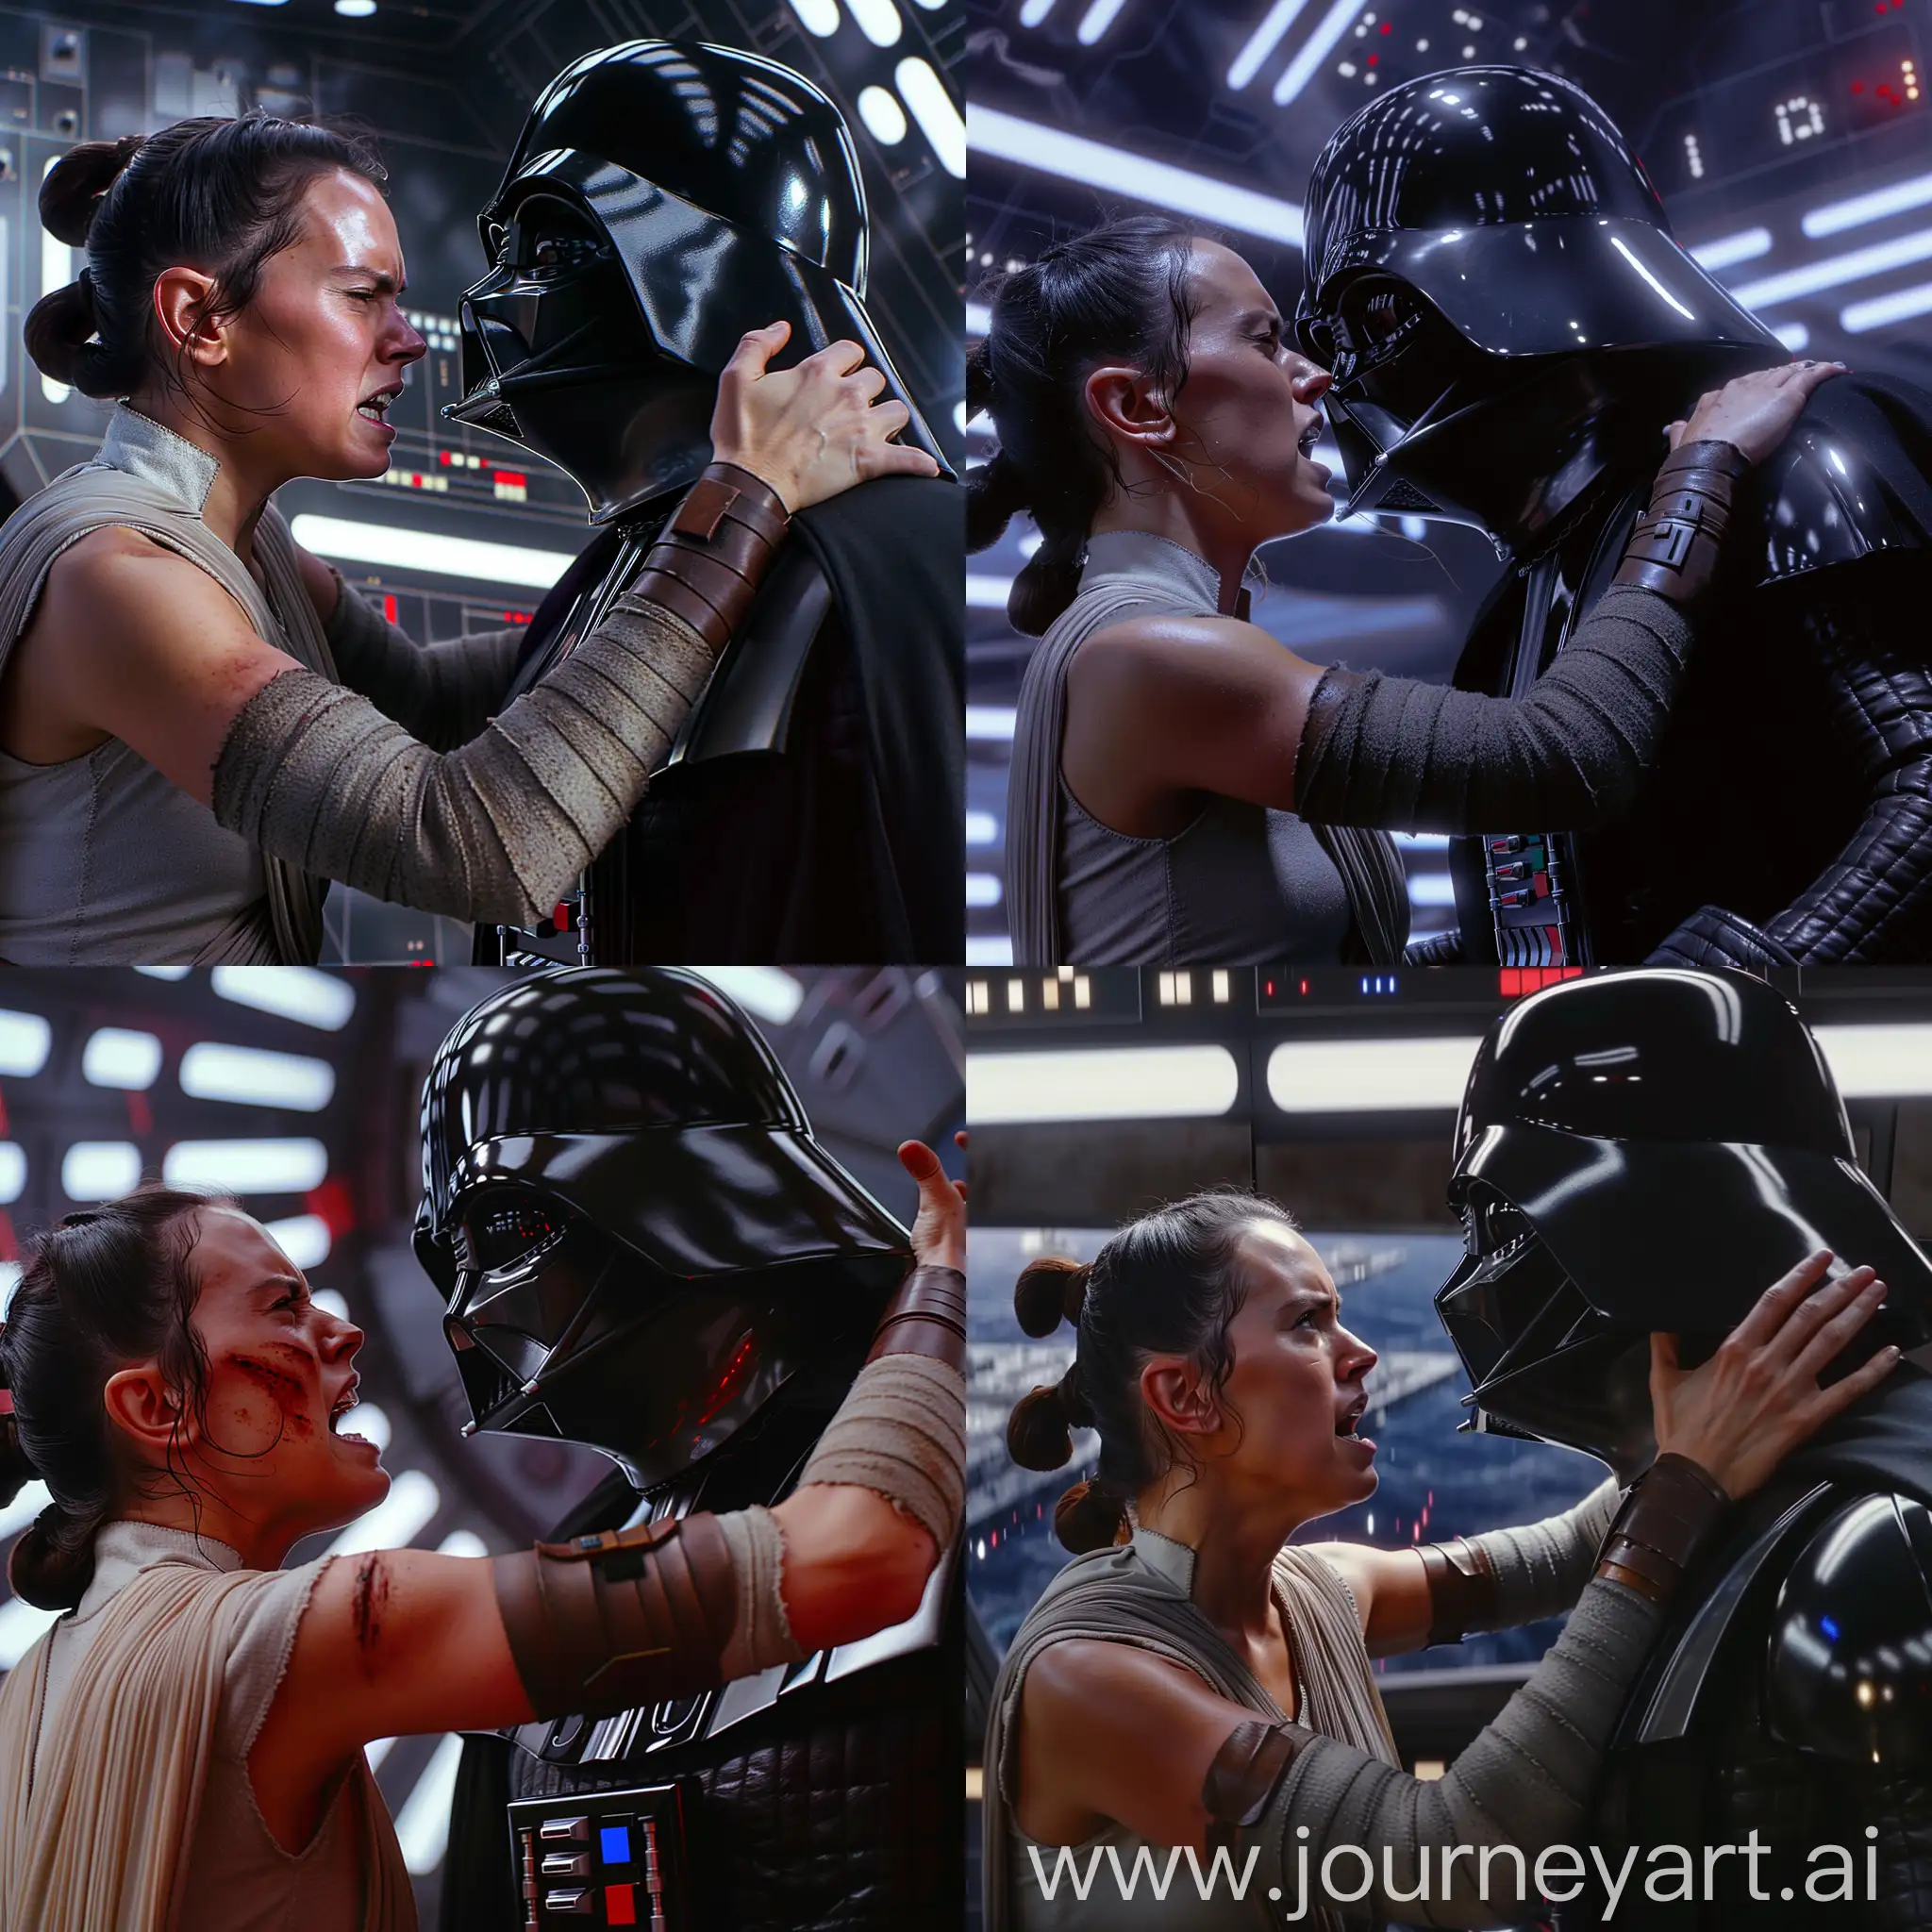 hyper-realistic images from the new Star Wars film, with a very furious Rey Skywalker facing Darh Vader face to face with her hand on his neck, angle focusing on her face, on the ship, in 8k resolution